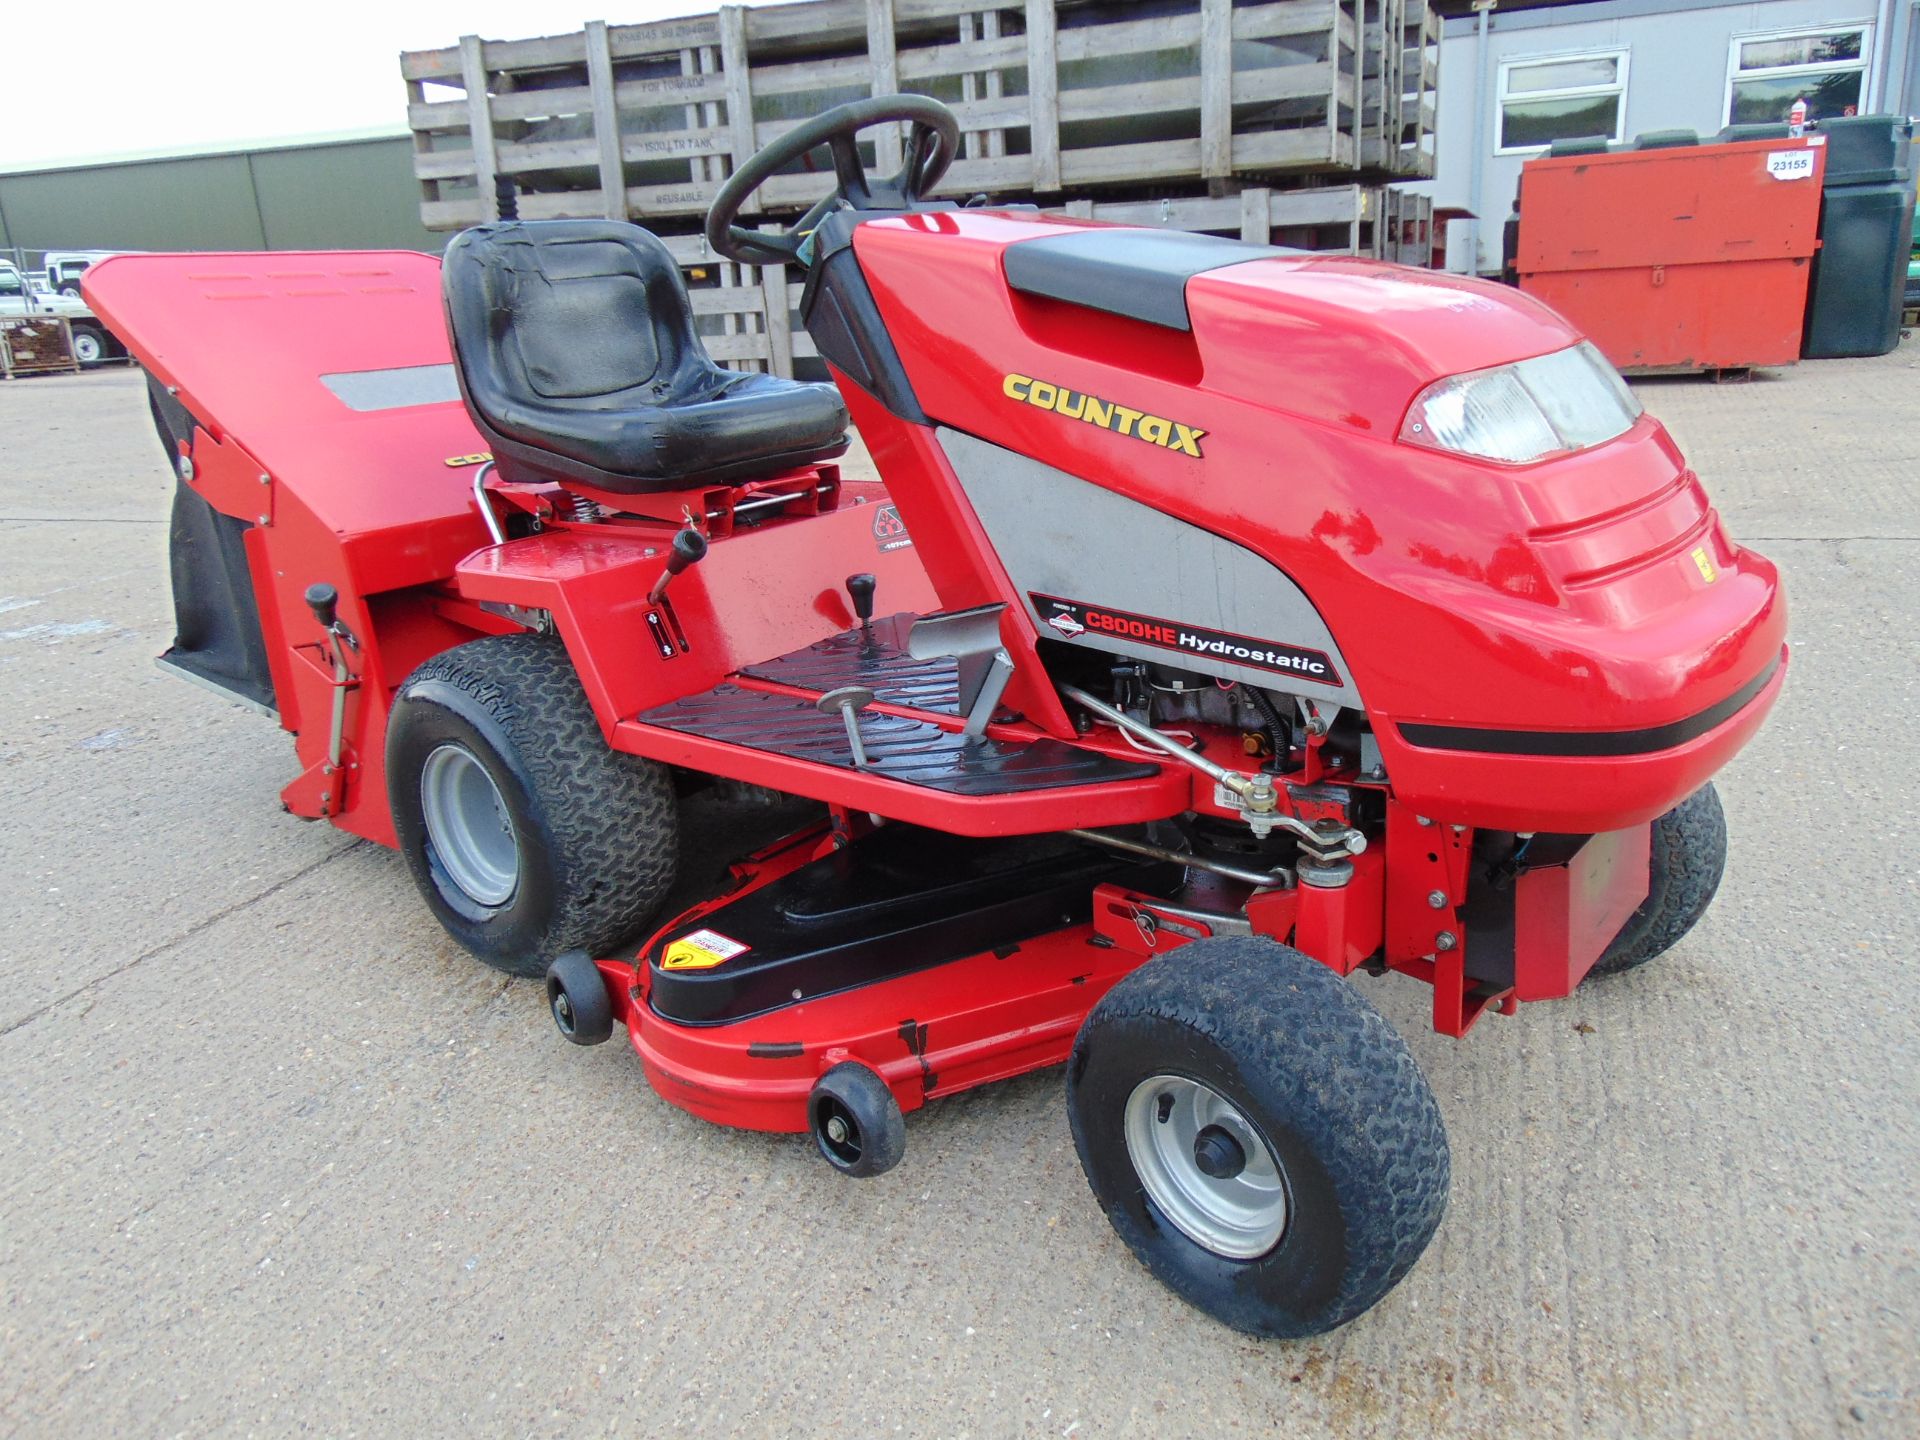 Countax C800HE Ride On Mower - Image 13 of 13